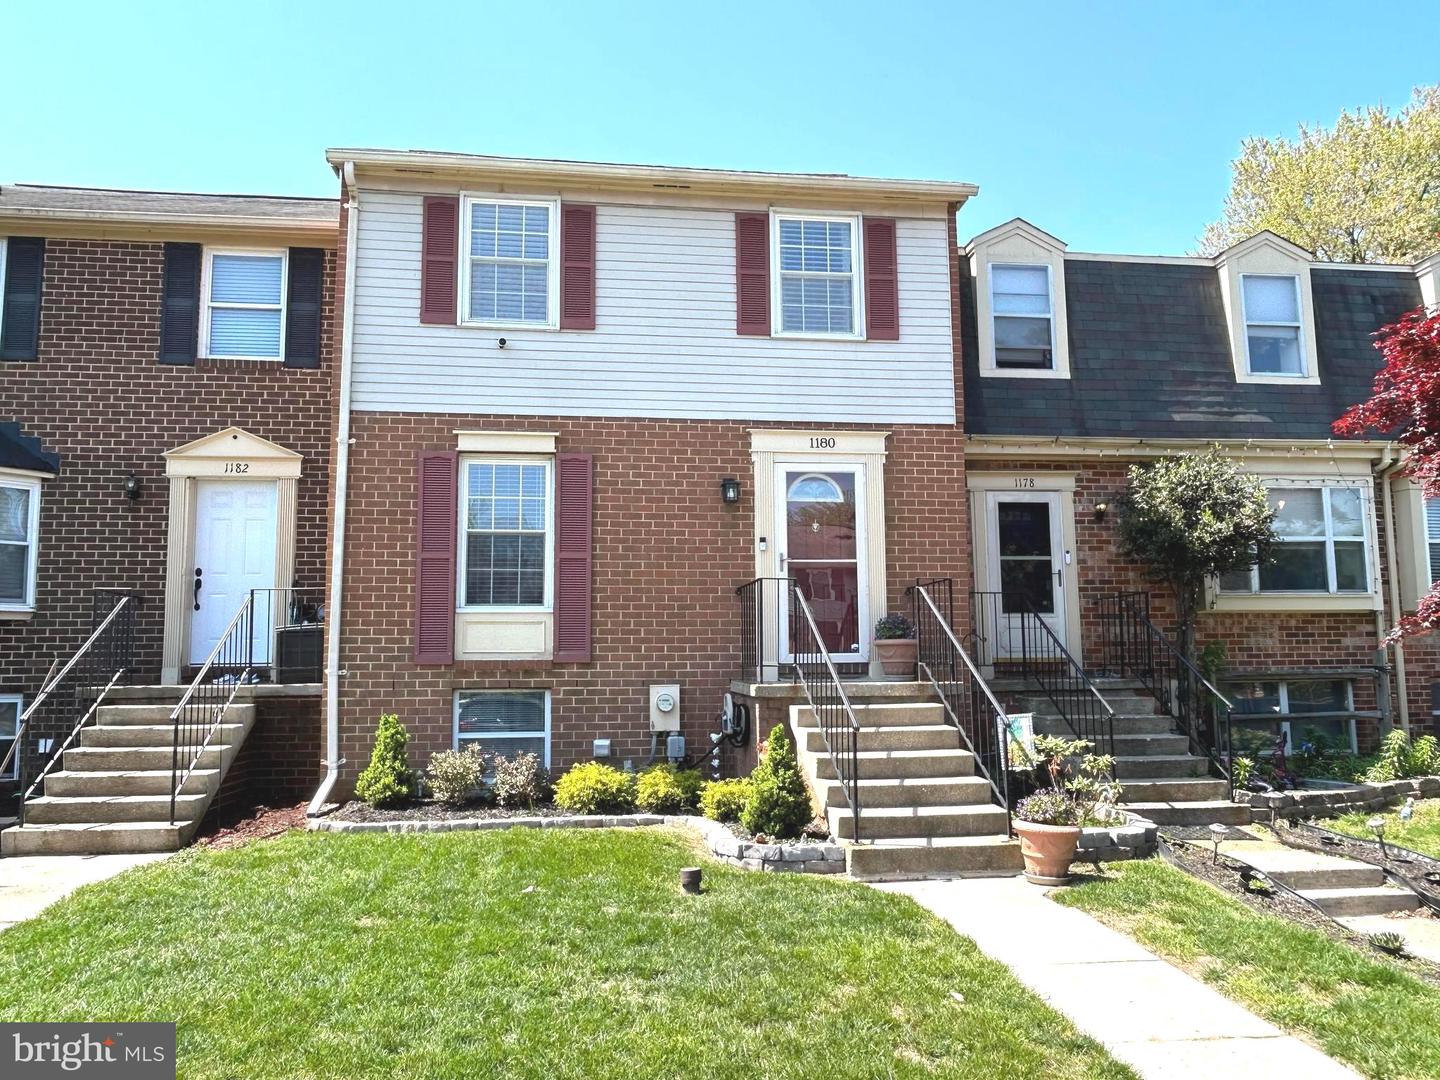 View Pasadena, MD 21122 townhome